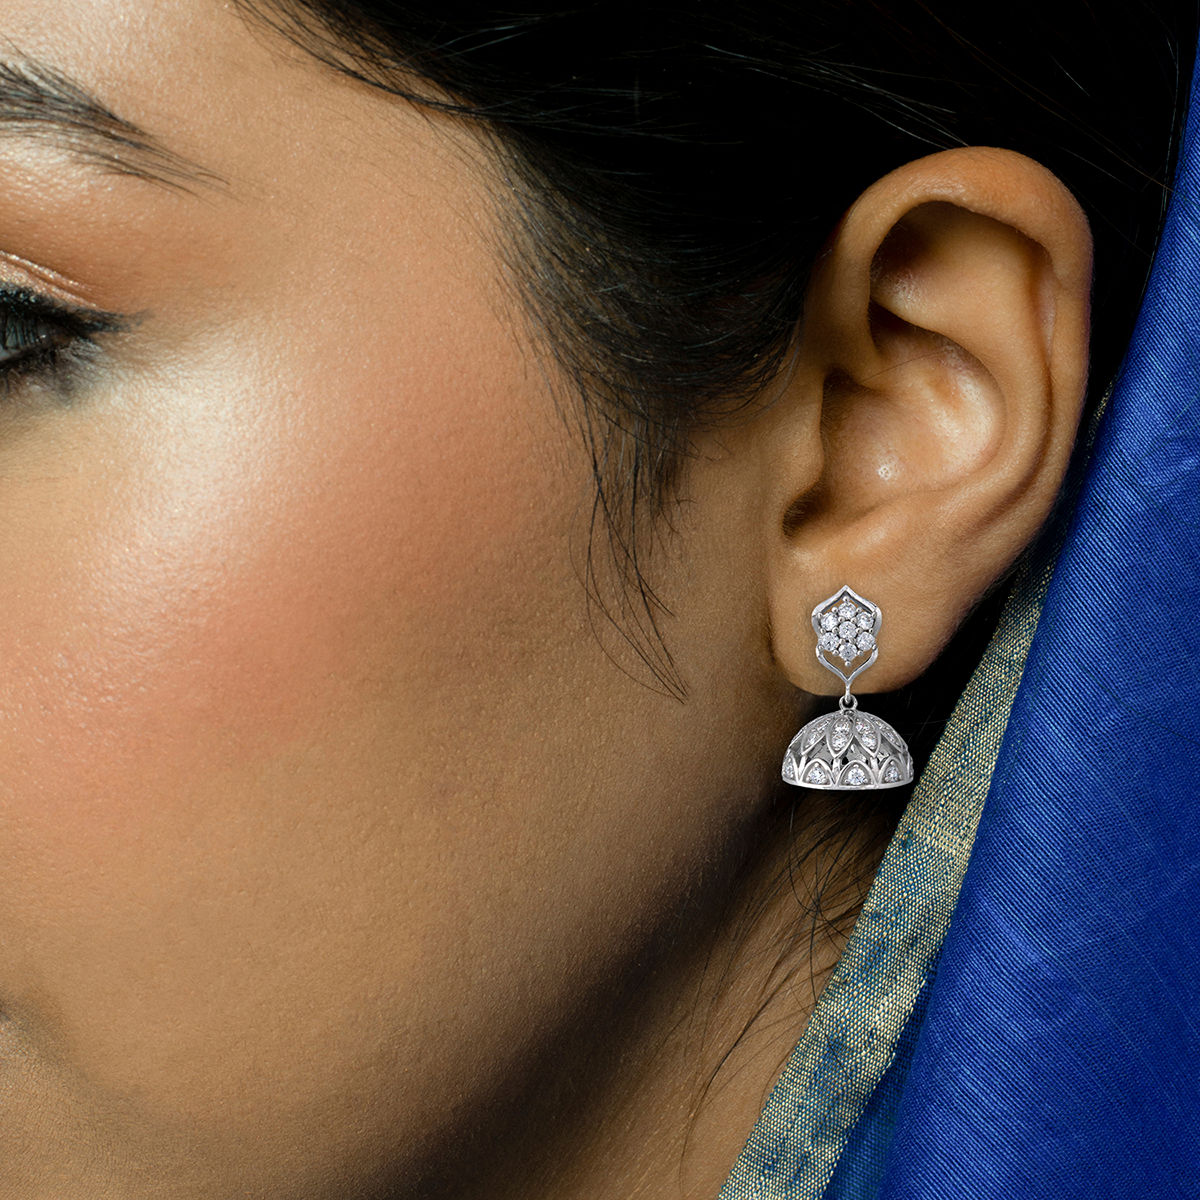 Affordable Diamond Earrings under 500  Take a look